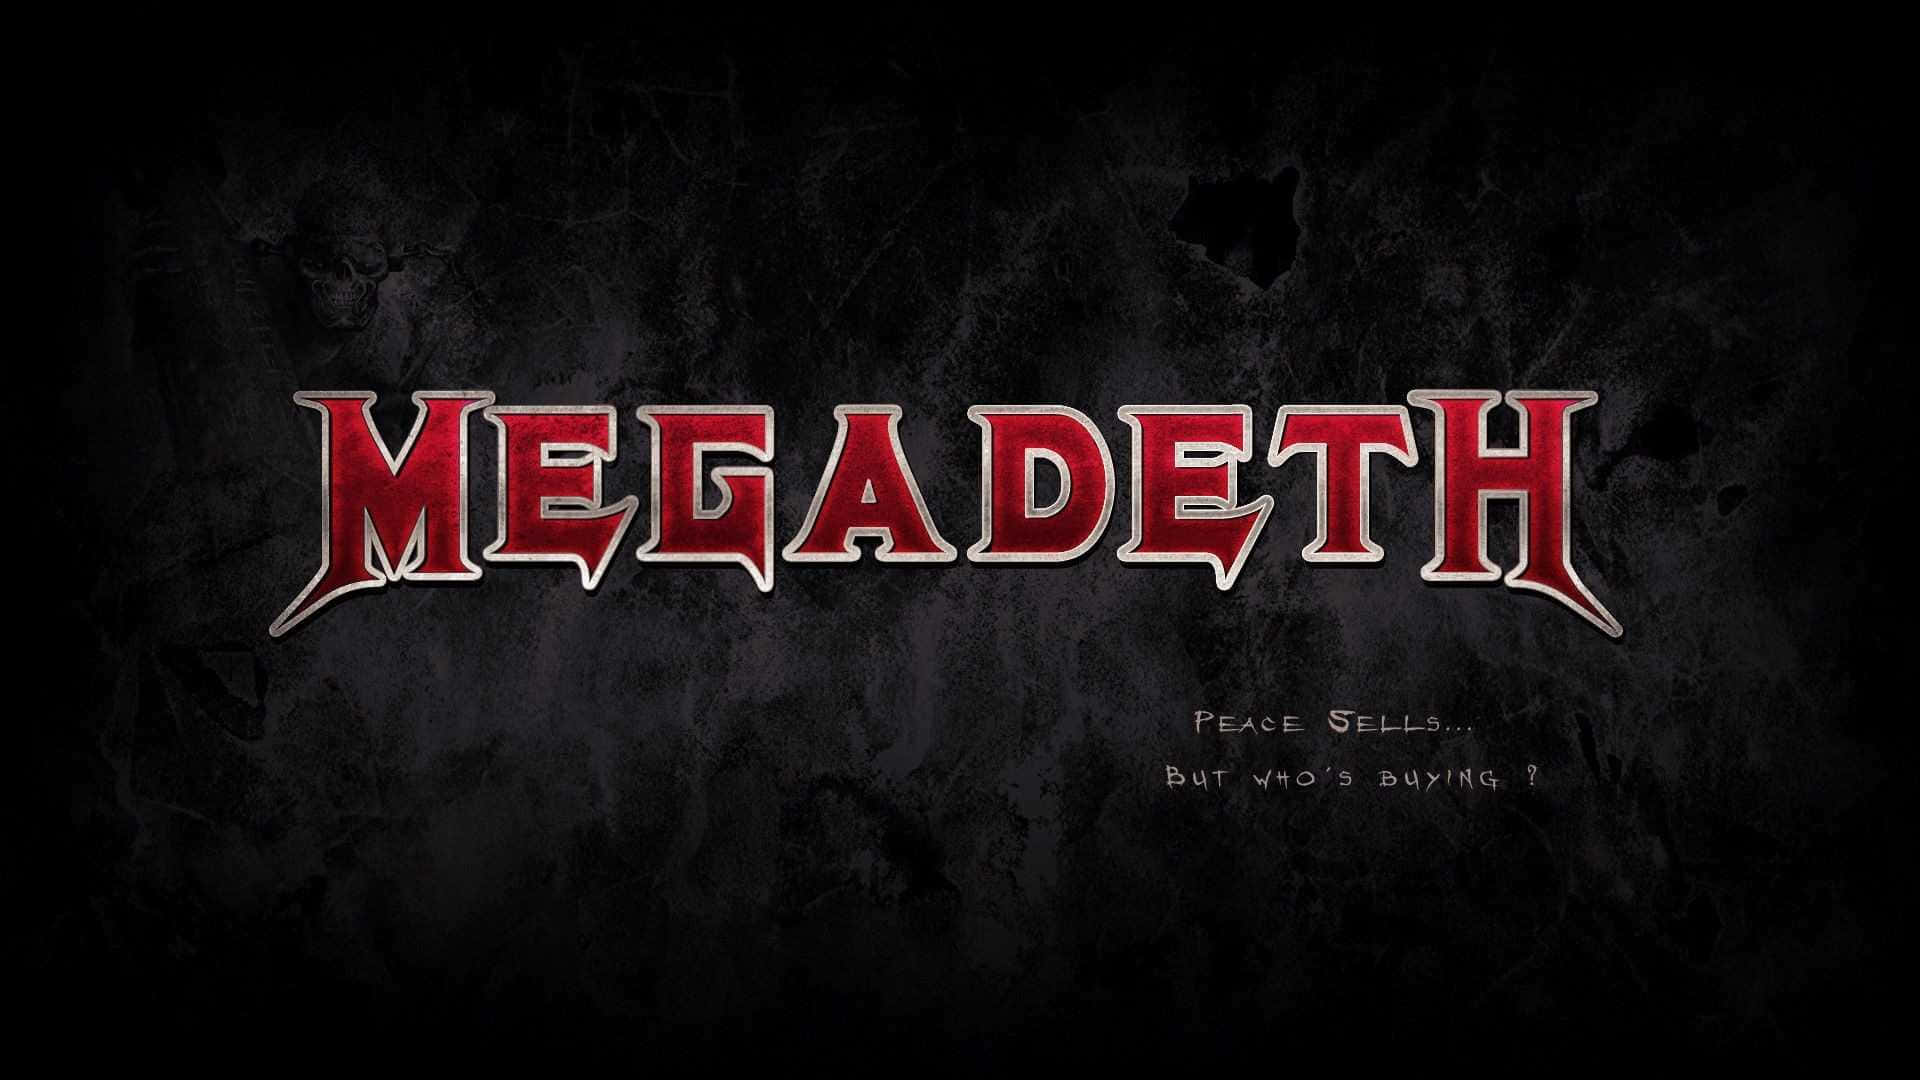 Megadeth Band Logowith Quote Wallpaper